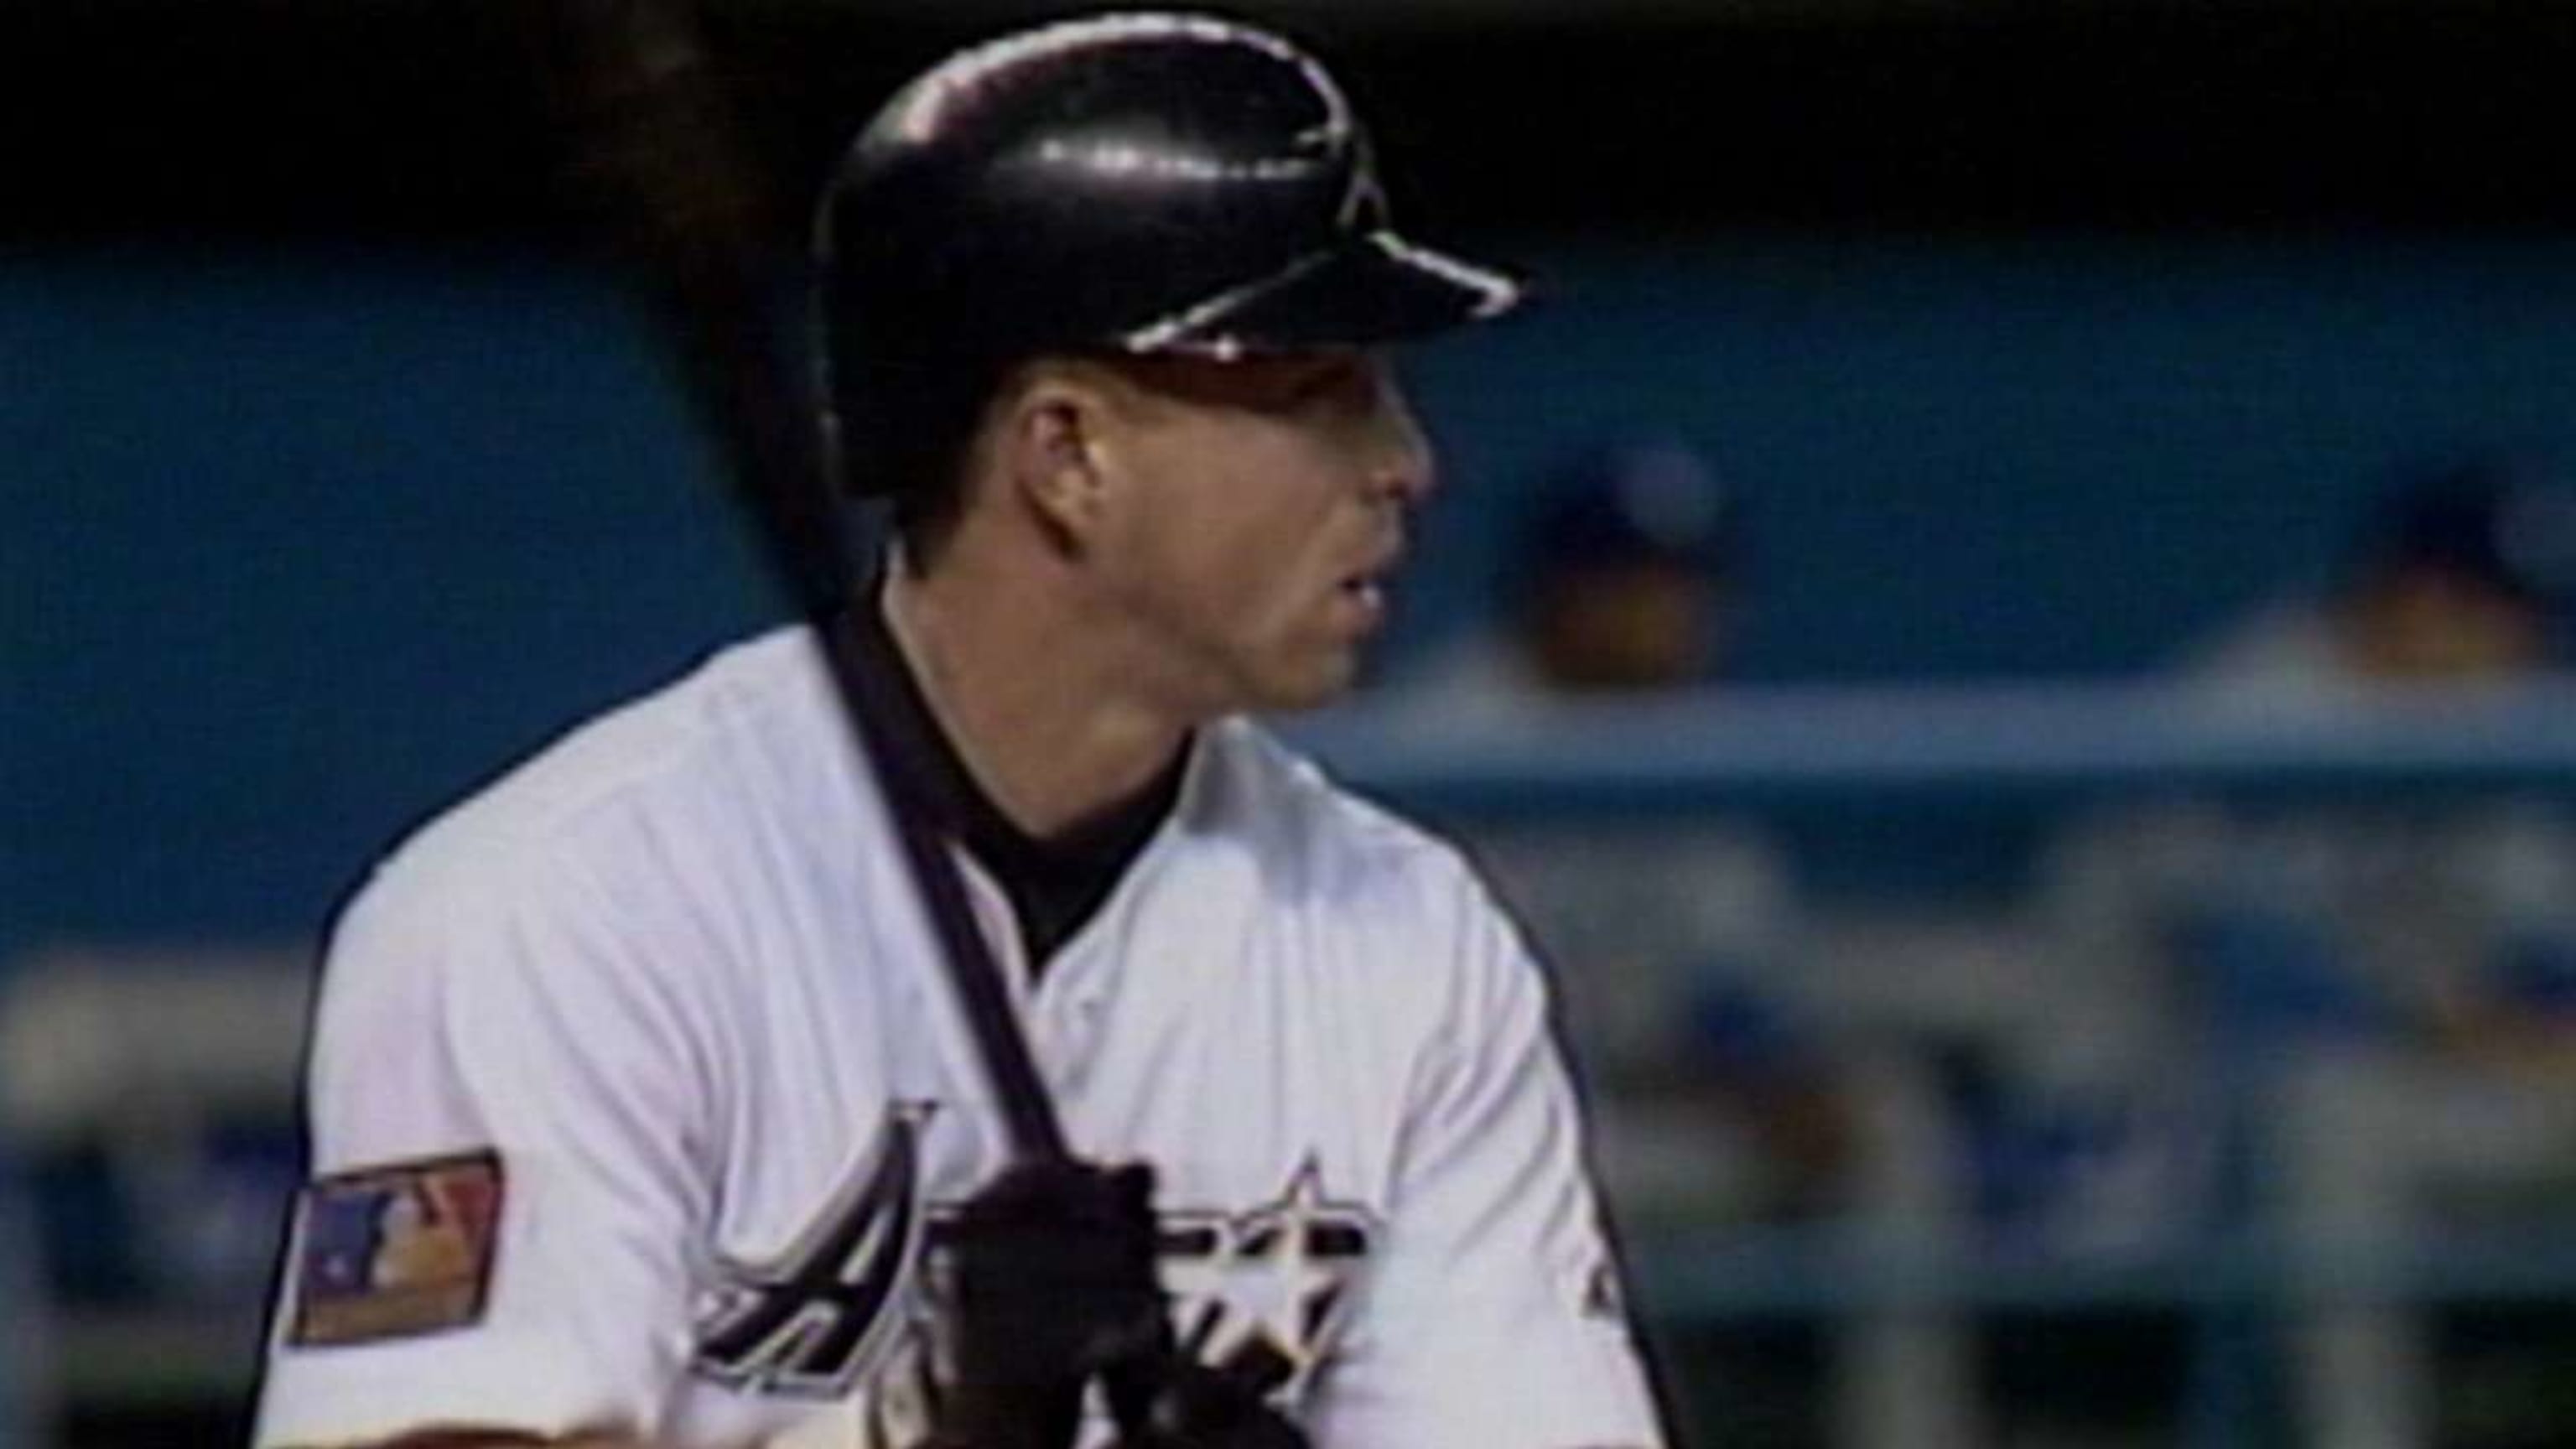 Jeff Bagwell's top moments